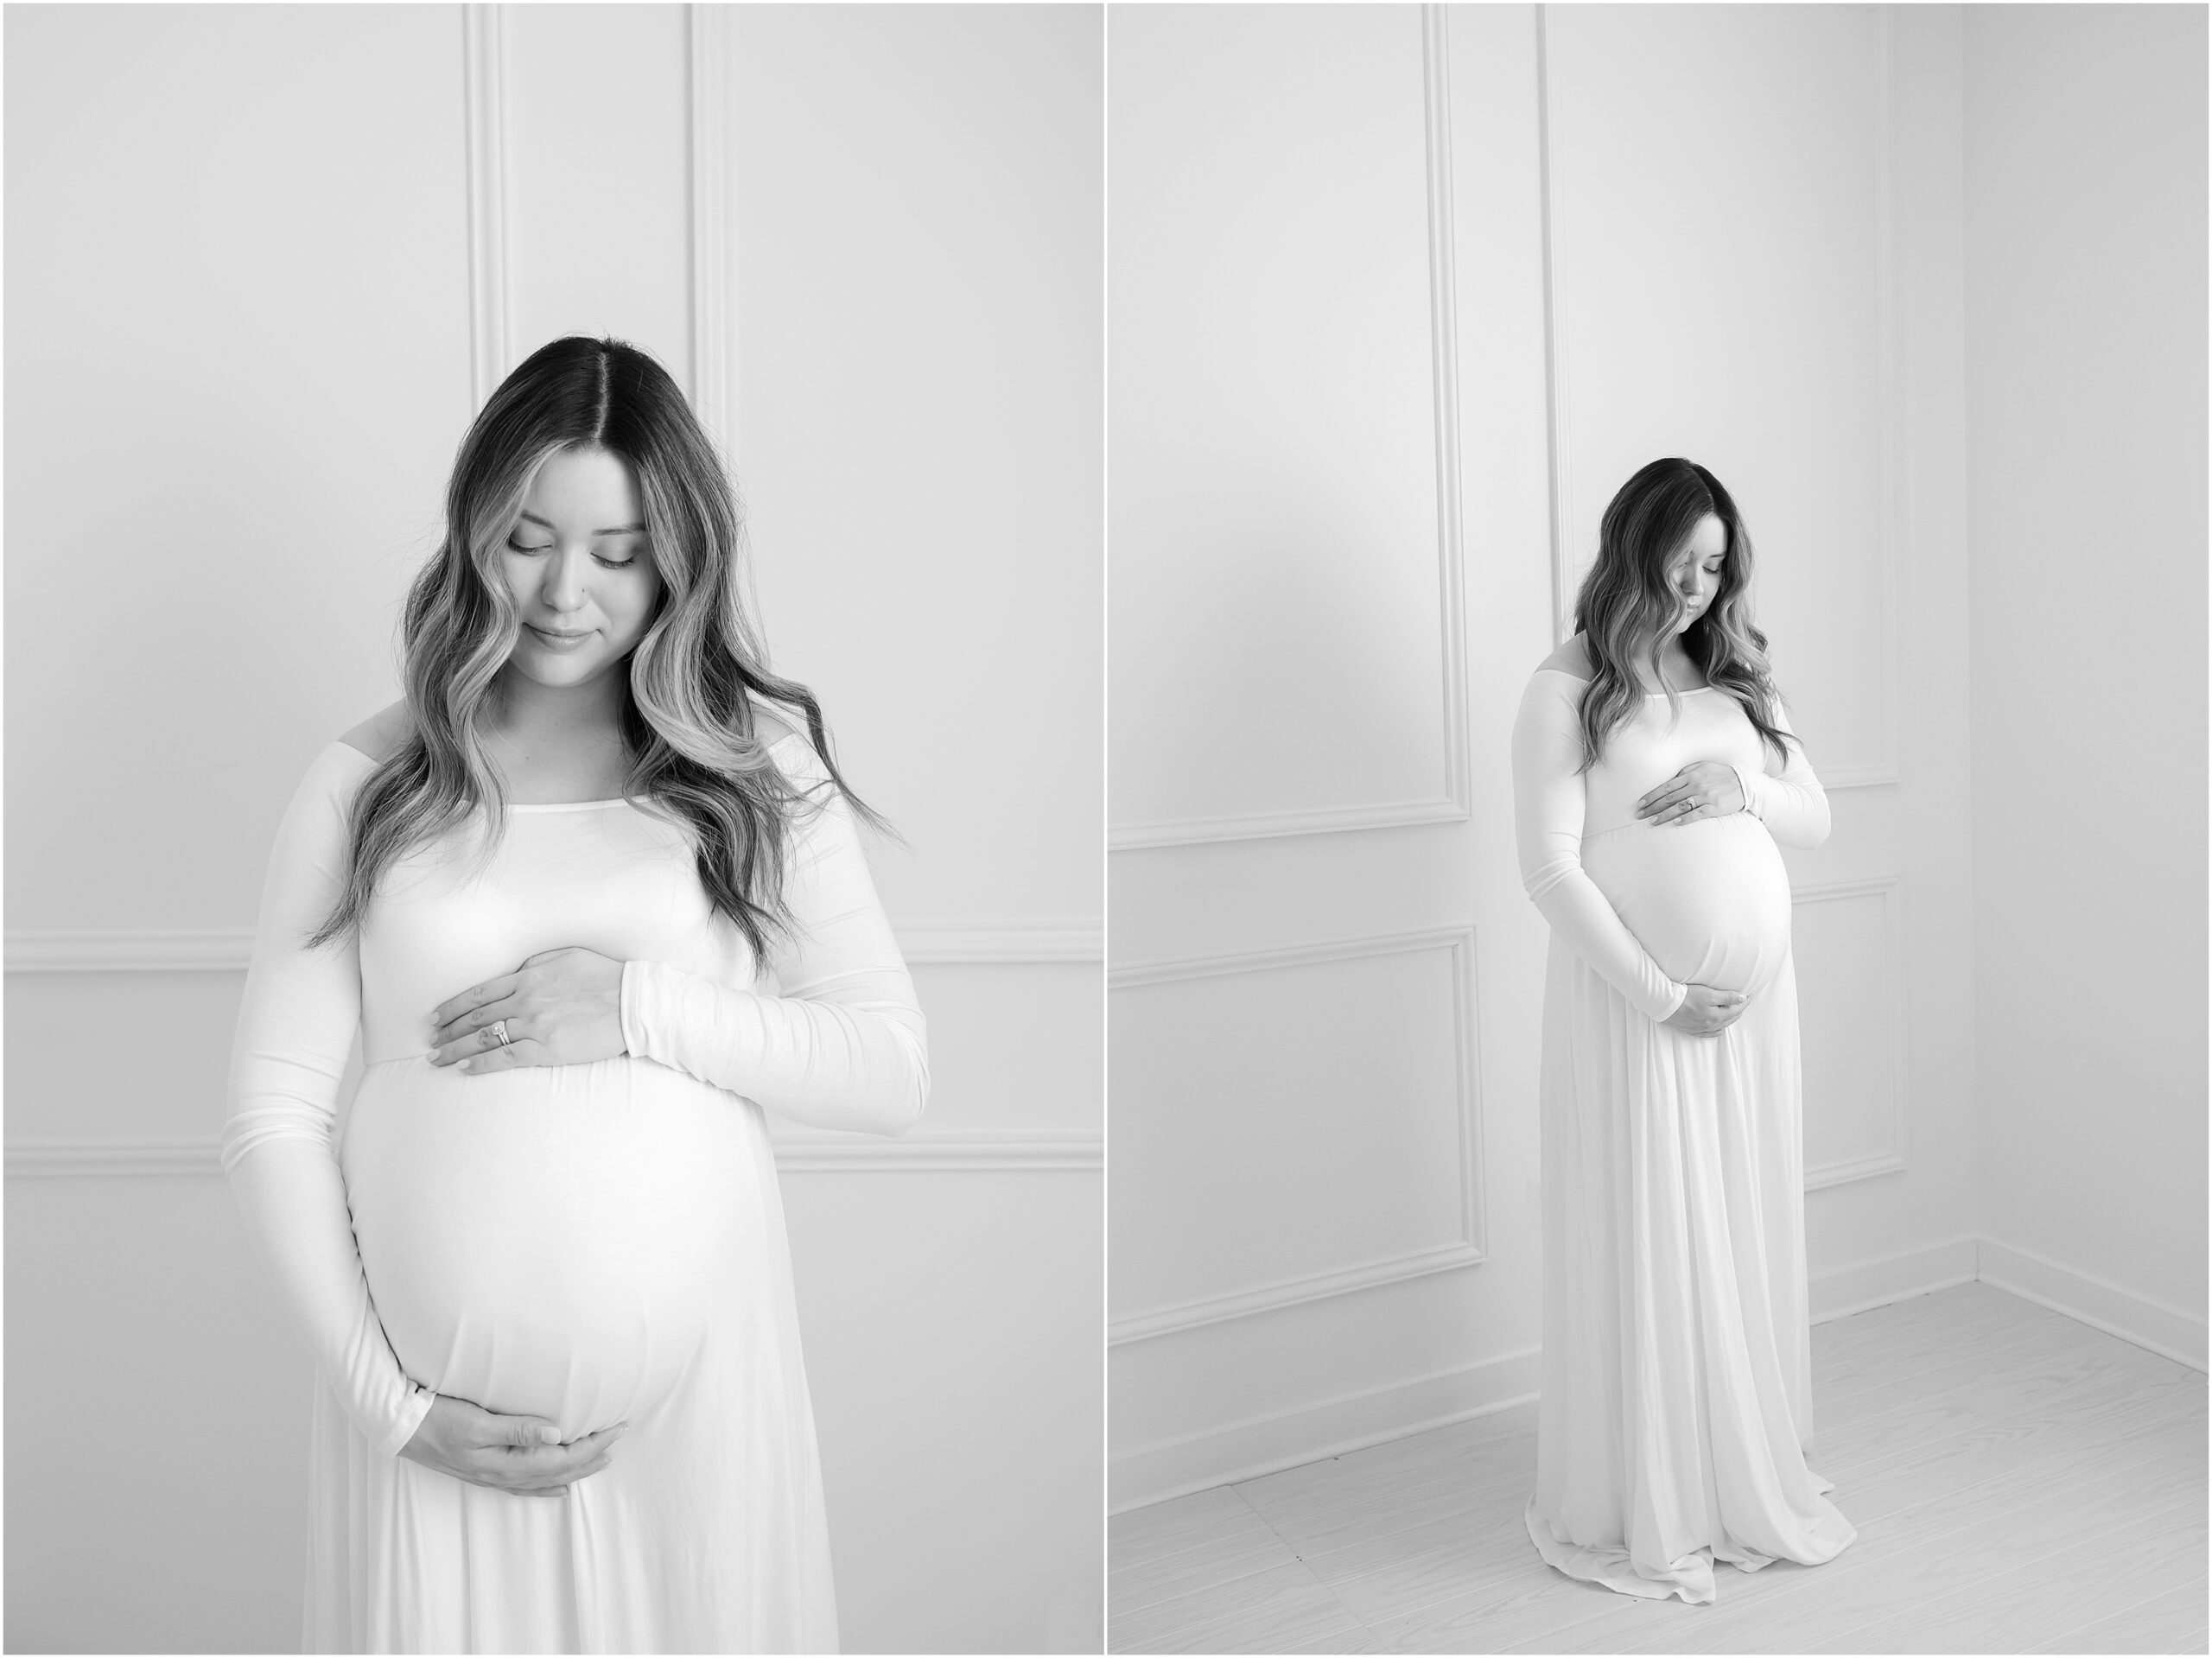 Collage of two black and white photos of a pregnant woman with long hair wearing a white maternity gown as she poses for maternity photos